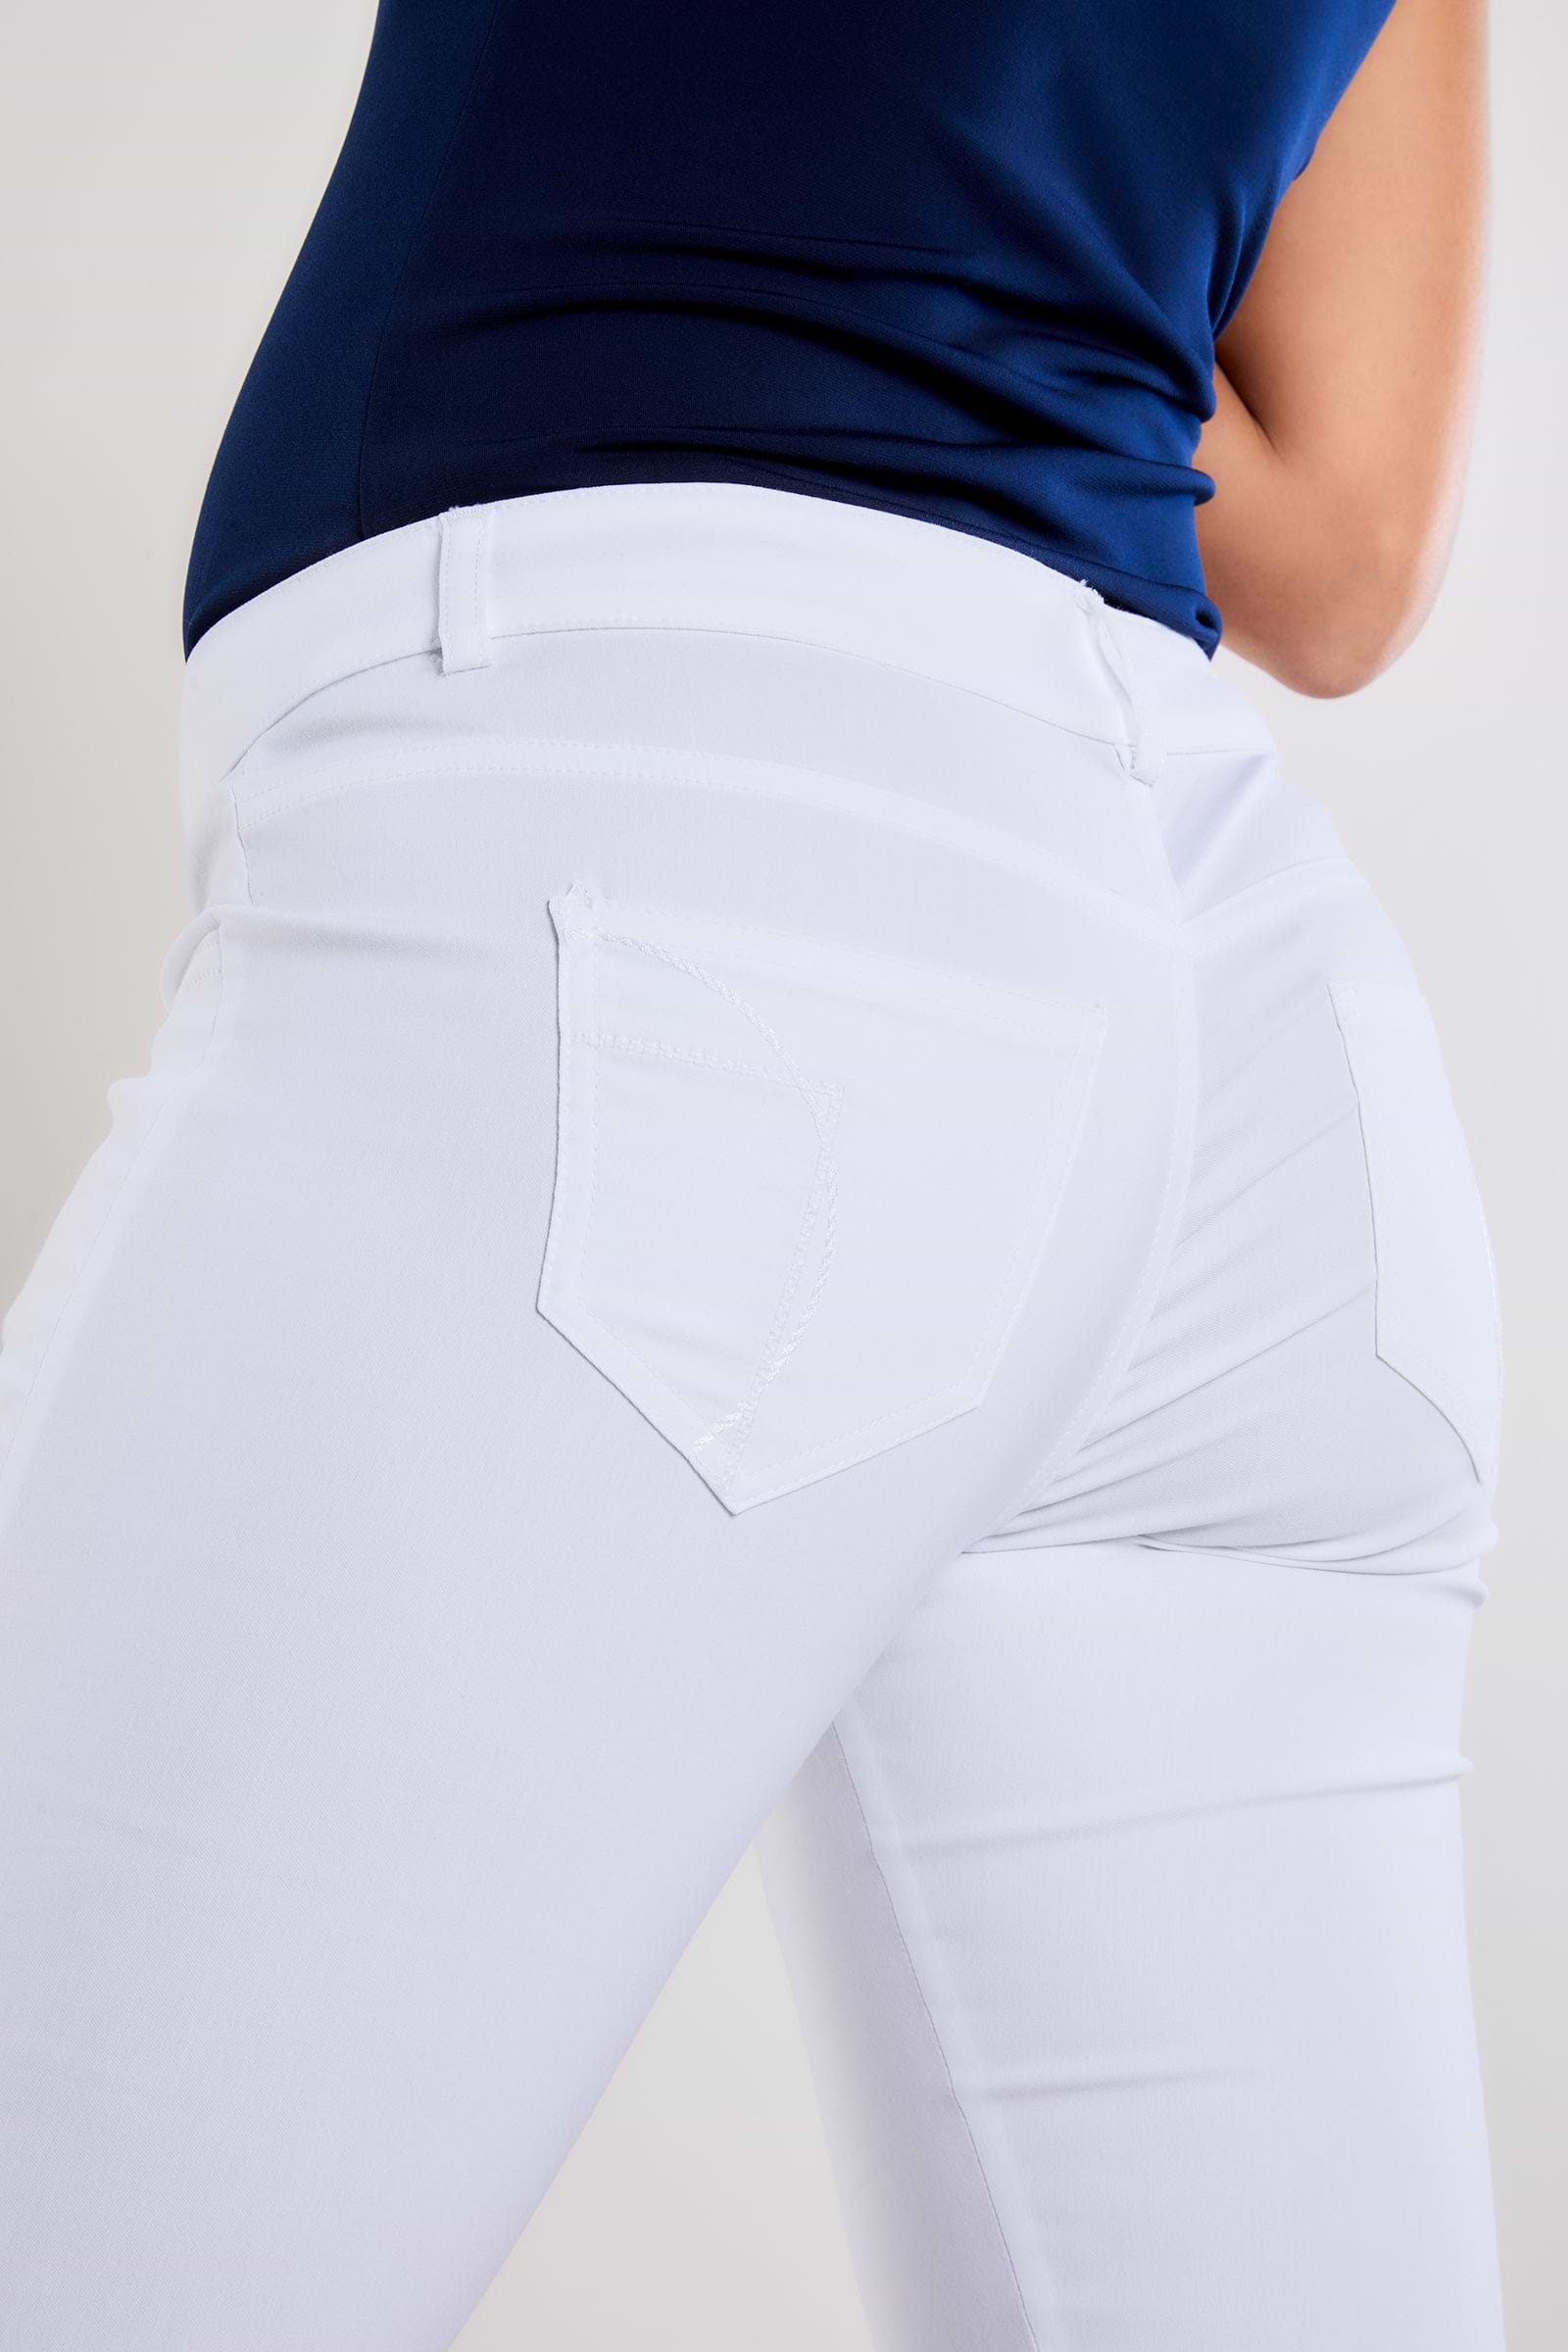 The Best Travel Pants. Back Pockets of the Luisa Skinny Jean Pant in White